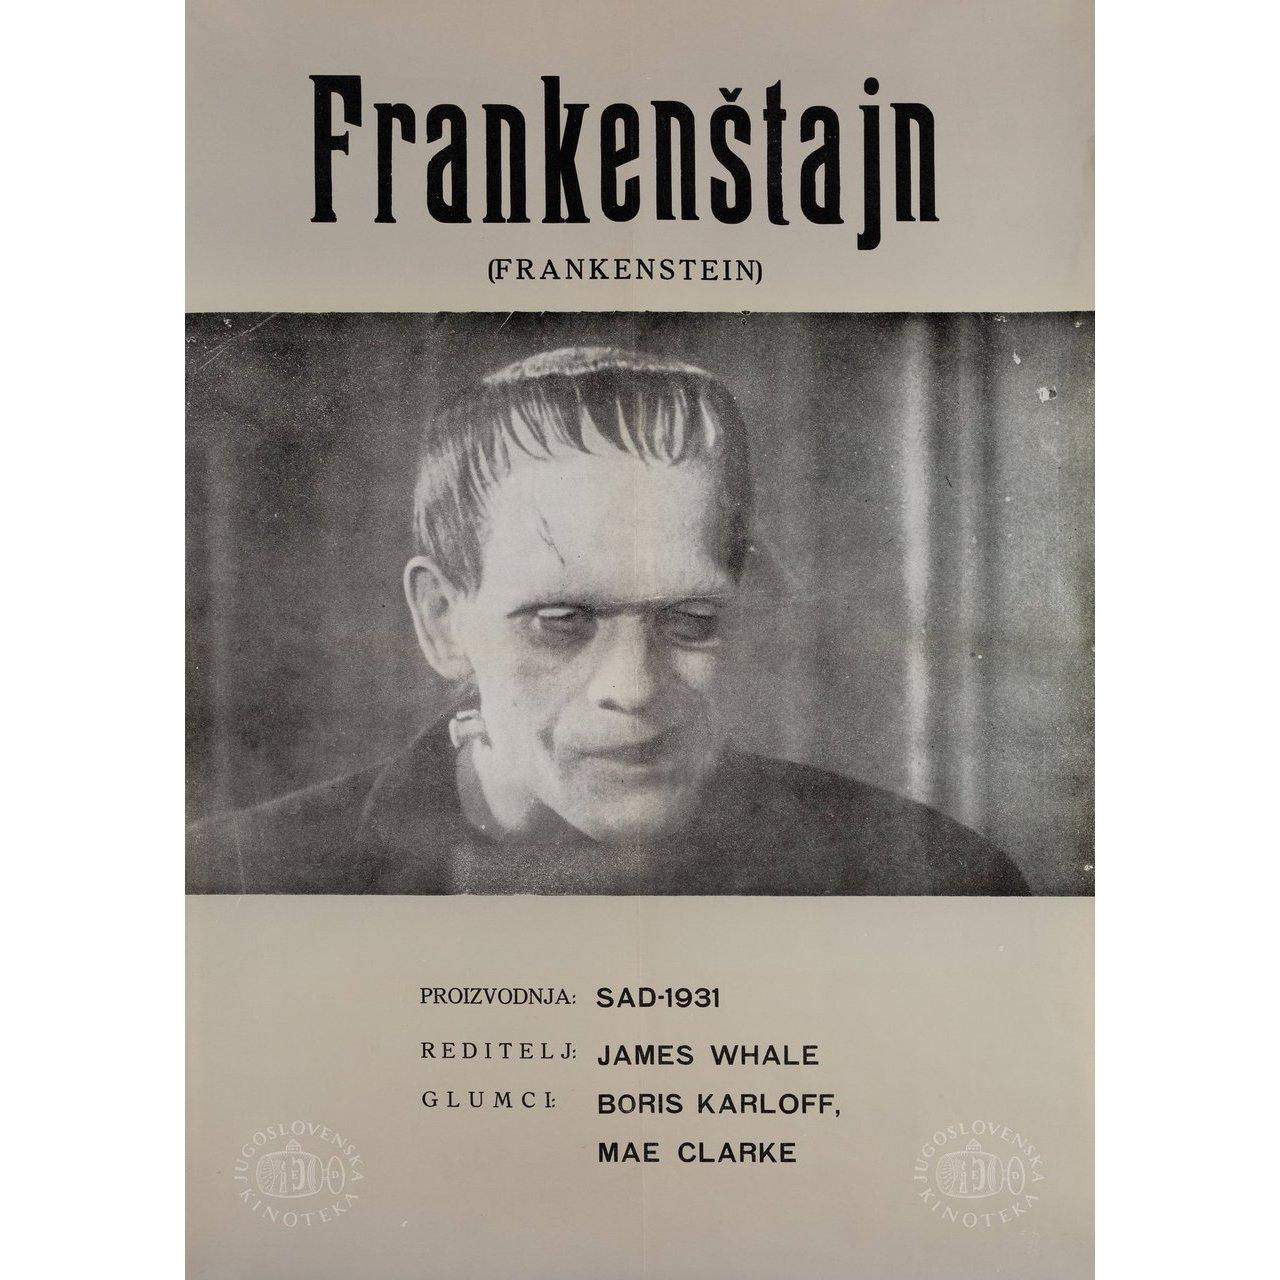 Original 1960s Yugoslav B2 poster for the first Yugoslav theatrical release of the 1931 film Frankenstein directed by James Whale with Colin Clive / Mae Clarke / John Boles / Boris Karloff. Very Good-Fine condition, folded. Many original posters